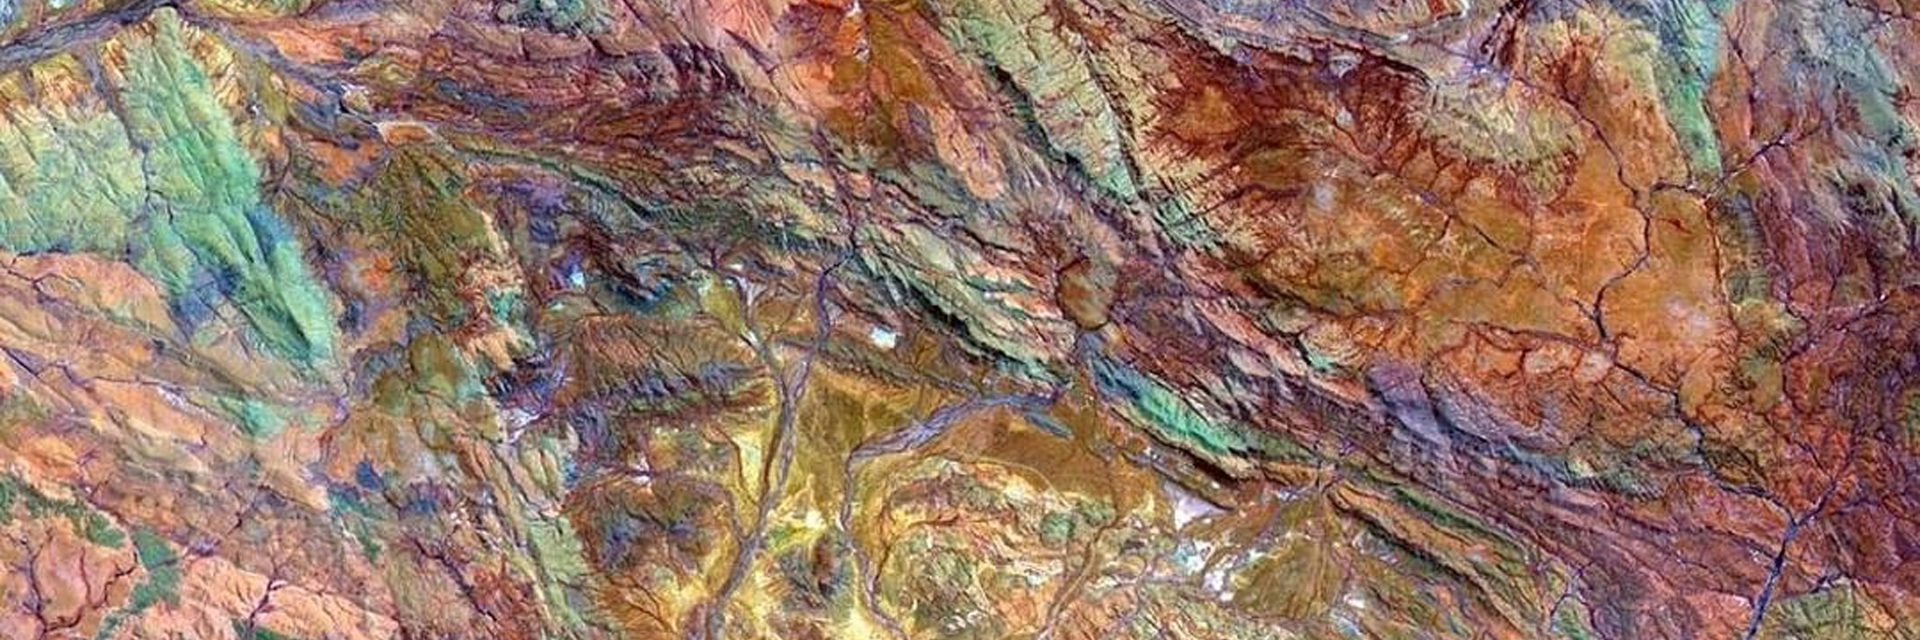 Nasa Earth shared a colourful image of the oldest rocks on the planet, which are found in Pilbara in northwestern Australia.